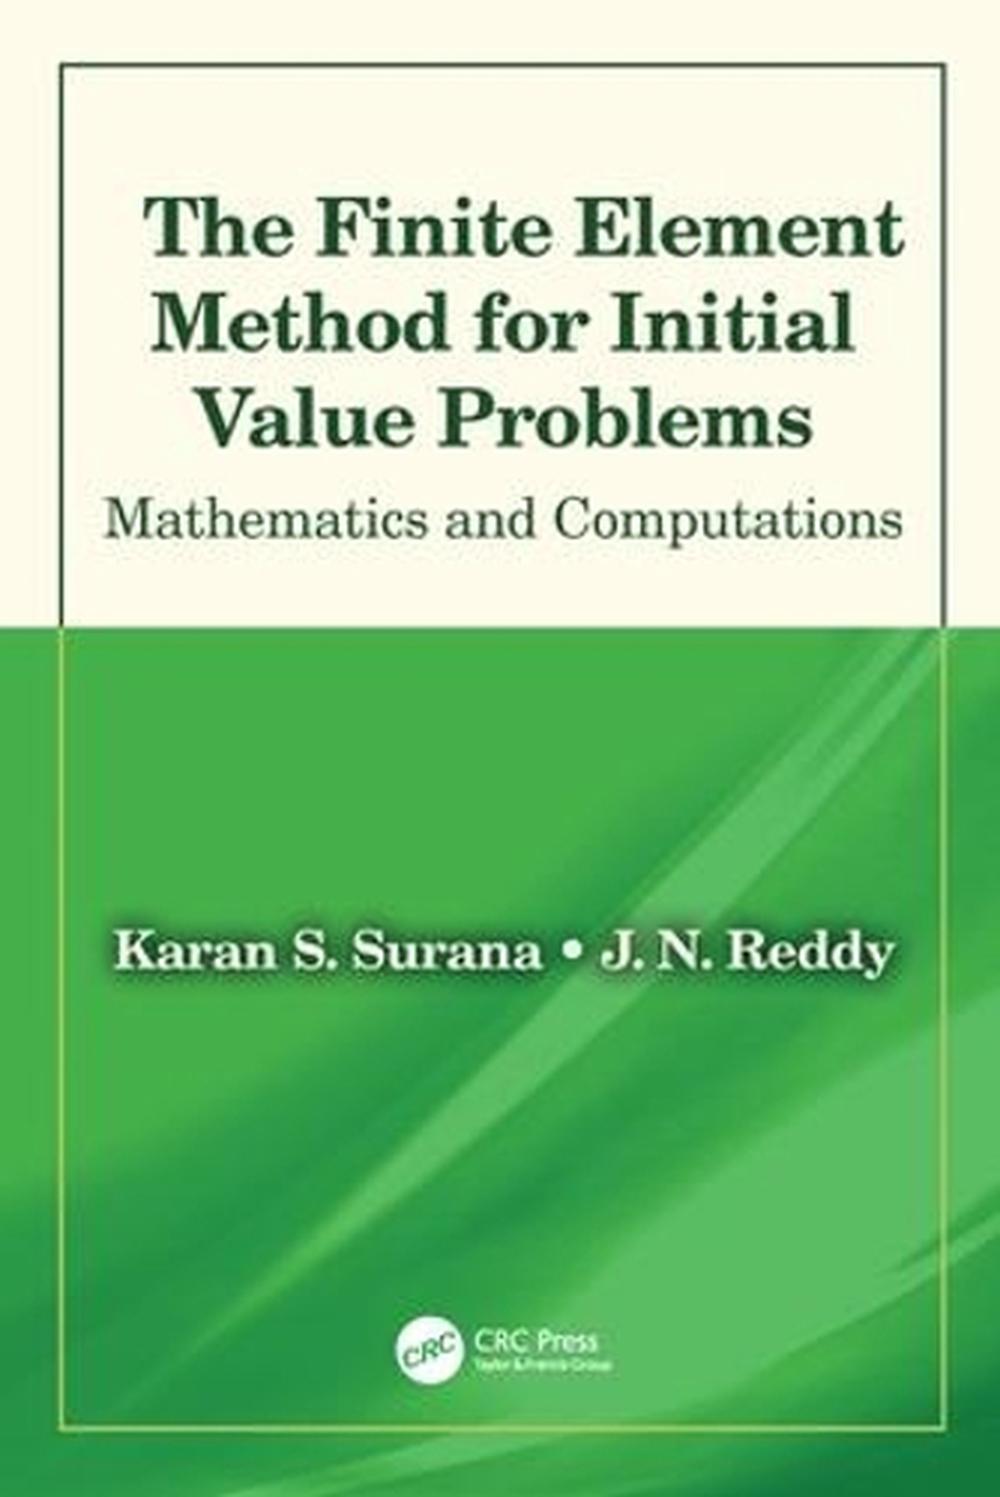 The　Reddy,　Buy　Finite　Initial　Problems　online　Element　Hardcover,　Method　for　The　Value　by　at　9781138576377　Nile